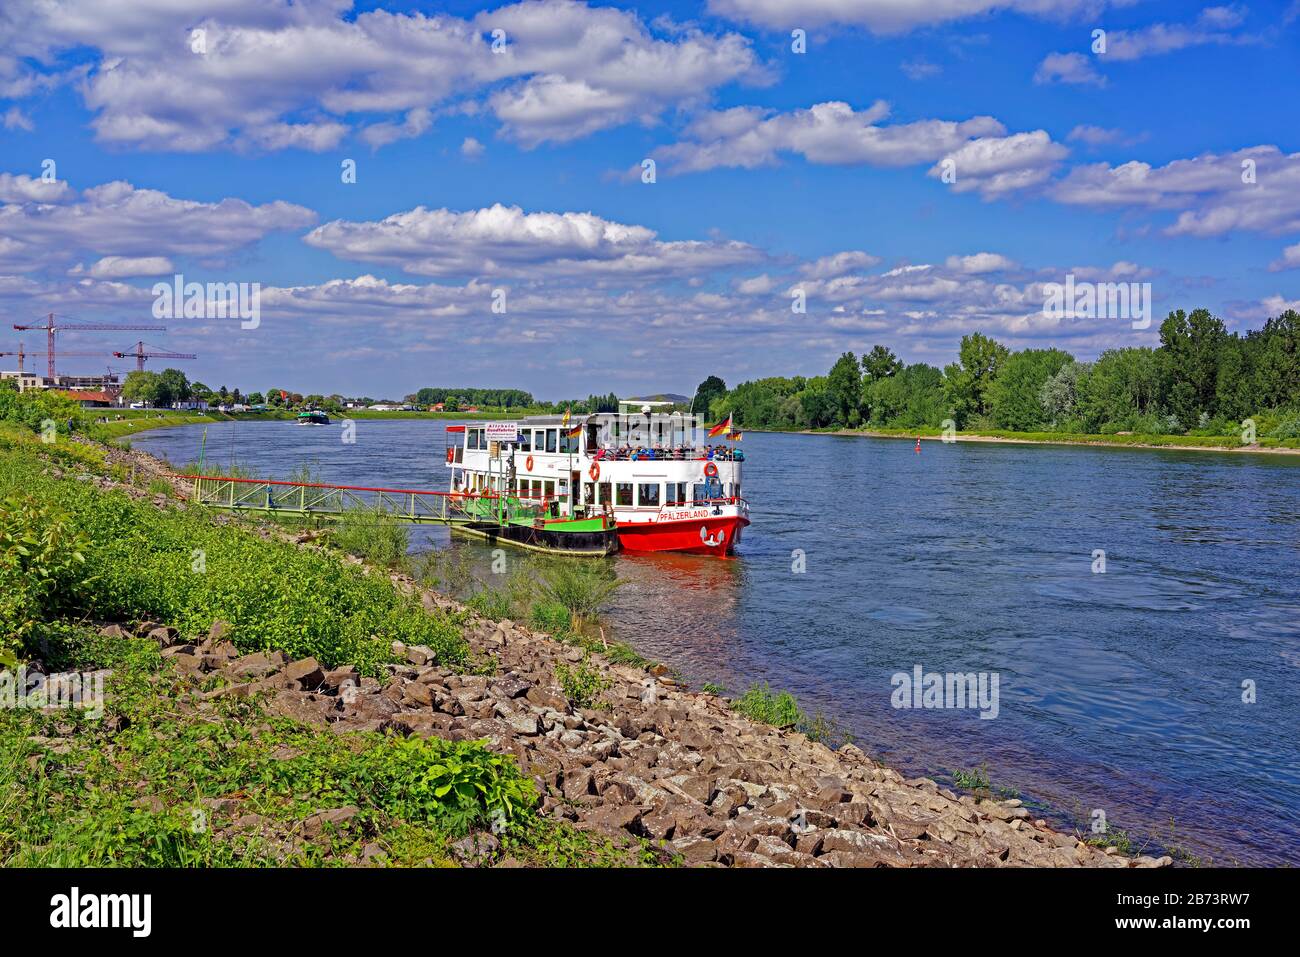 Germany, Rhineland-Palatinate, Speyer, Rhine avenue, SchUM town, river, the Rhine, round trip ship, inland ship, plants, trees, people, people, place Stock Photo